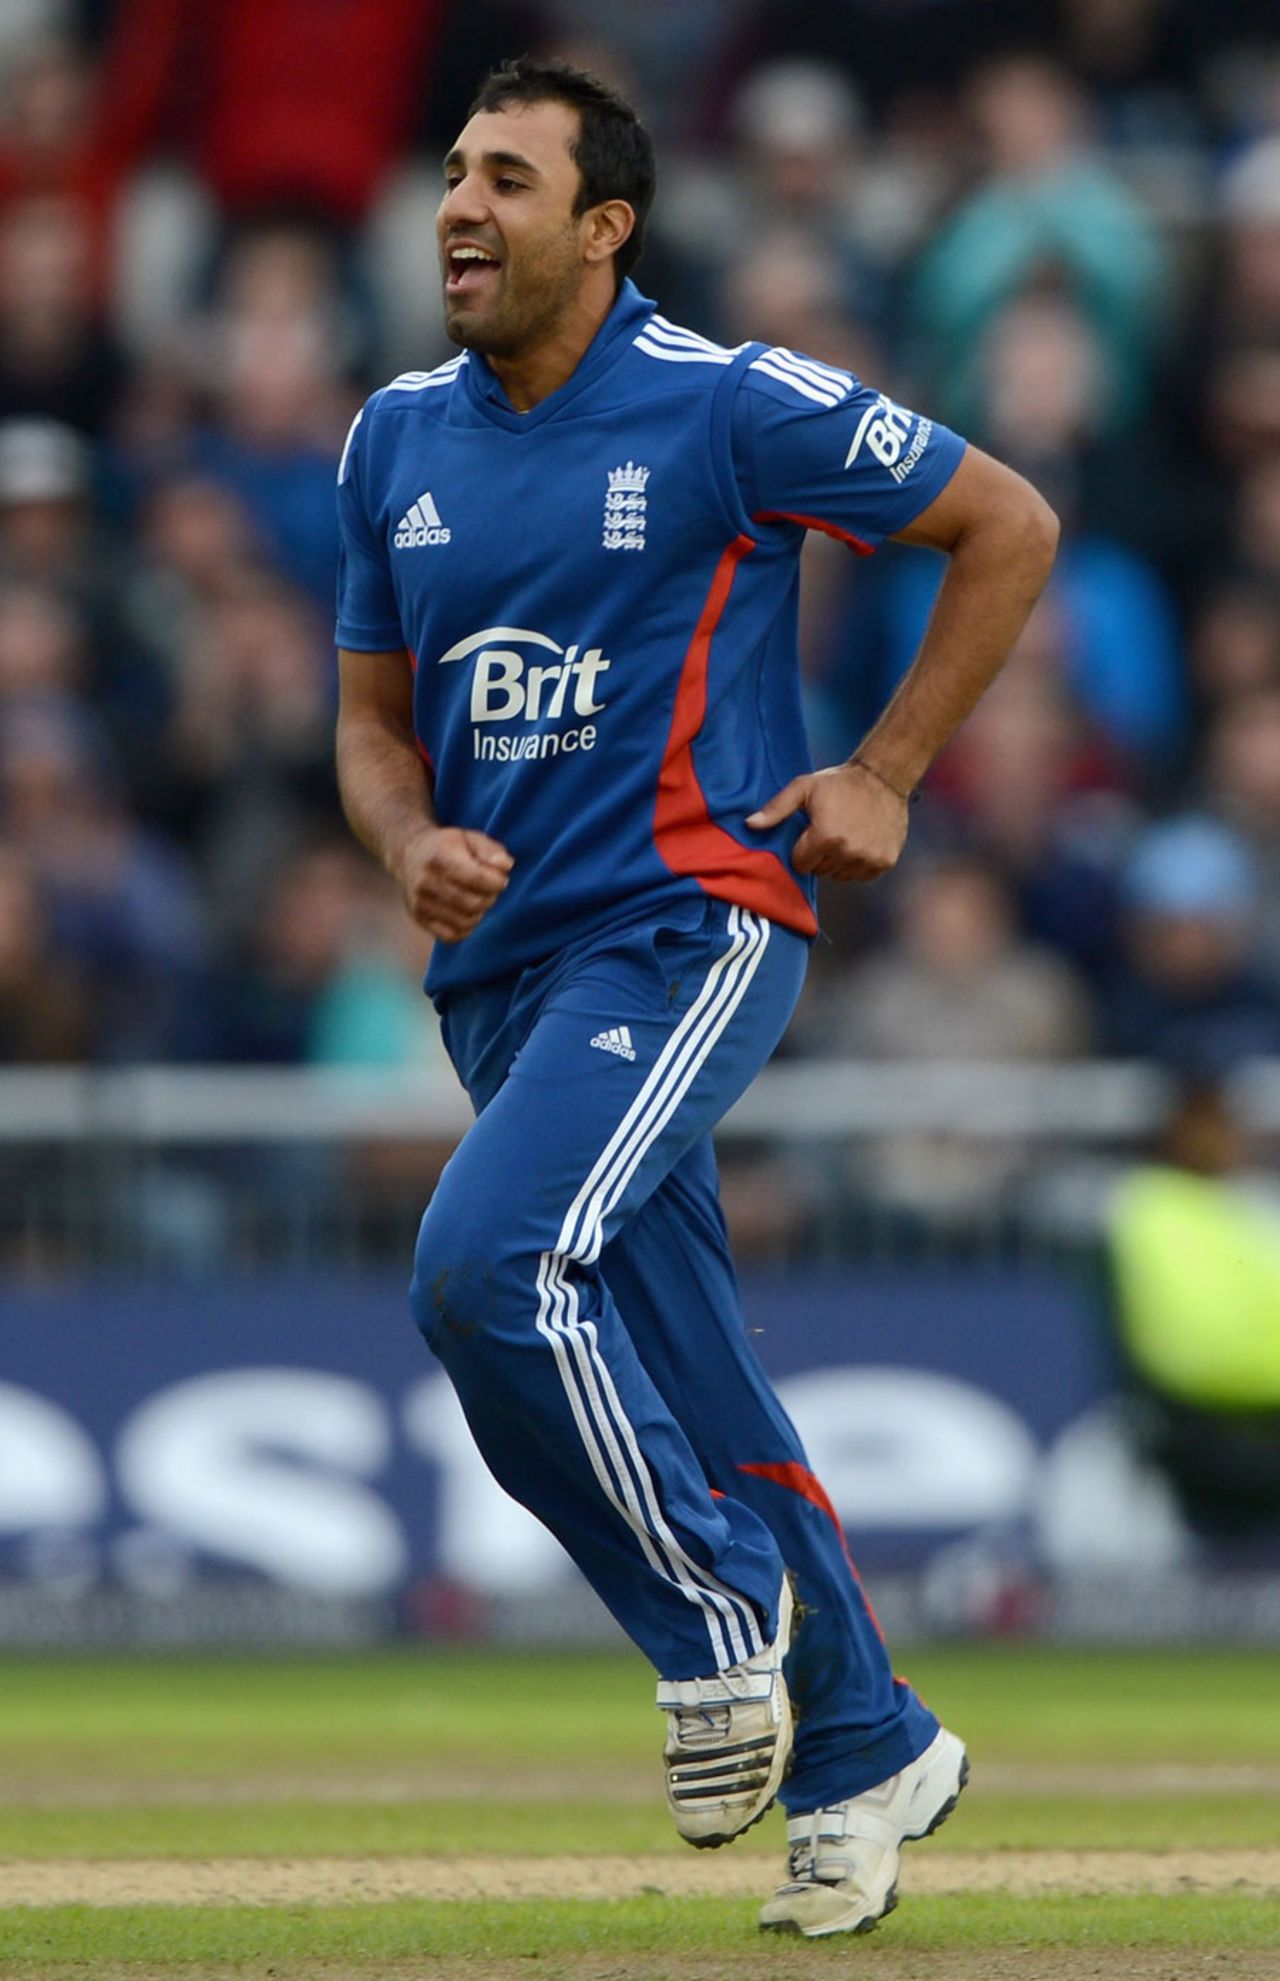 Ravi Bopara took a wicket with the first ball of his first two overs, England v Australia, 5th ODI, Old Trafford, July 10, 2012